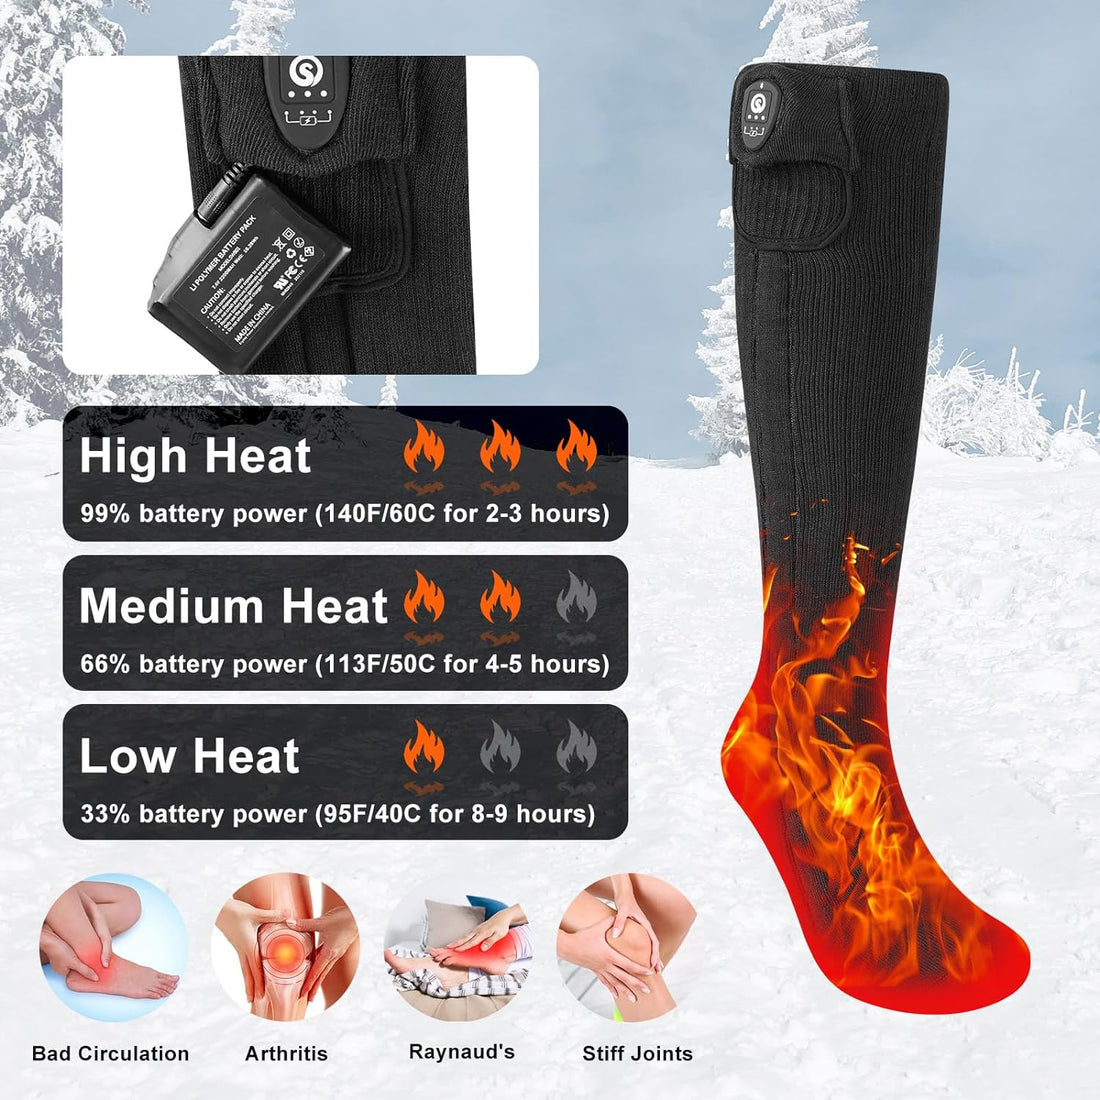 SAVIOR HEAT Heat Socks 2023 Upgraded - Bluetooth-Controlled Rechargeable Heated Socks, 7.4V 2200mAh Battery, Ideal for Cold Weather, Men & Women, Outdoor Activities